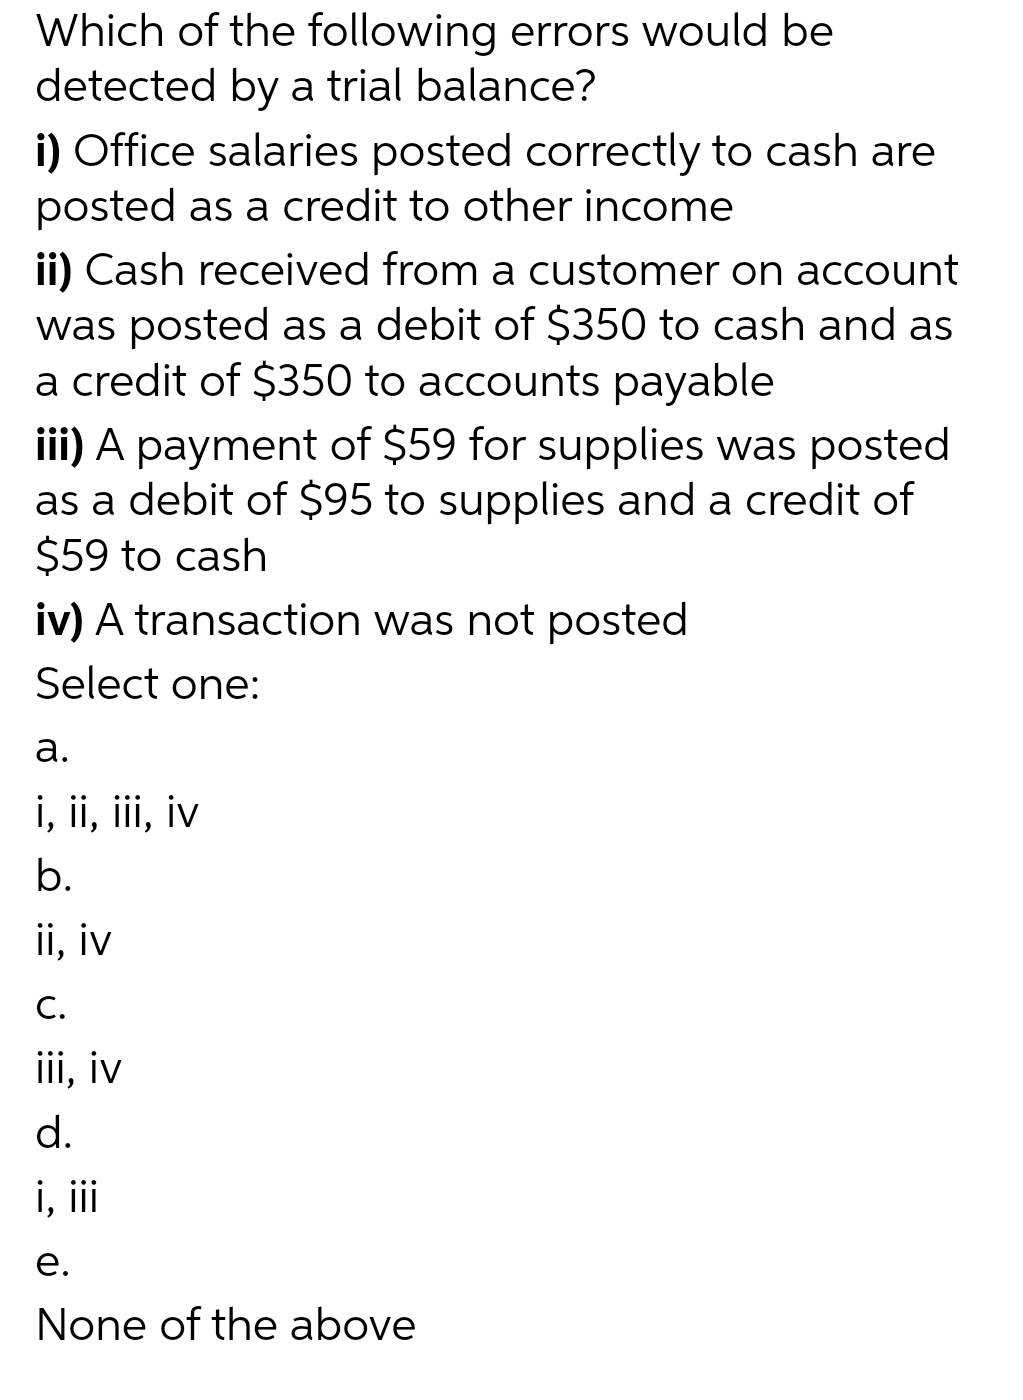 Which of the following errors would be
detected by a trial balance?
i) Office salaries posted correctly to cash are
posted as a credit to other income
ii) Cash received from a customer on account
was posted as a debit of $350 to cash and as
a credit of $350 to accounts payable
iii) A payment of $59 for supplies was posted
as a debit of $95 to supplies and a credit of
$59 to cash
iv) A transaction was not posted
Select one:
a.
i, ii, iii, iv
b.
ii, iv
C.
iii, iv
d.
i, iii
e.
None of the above